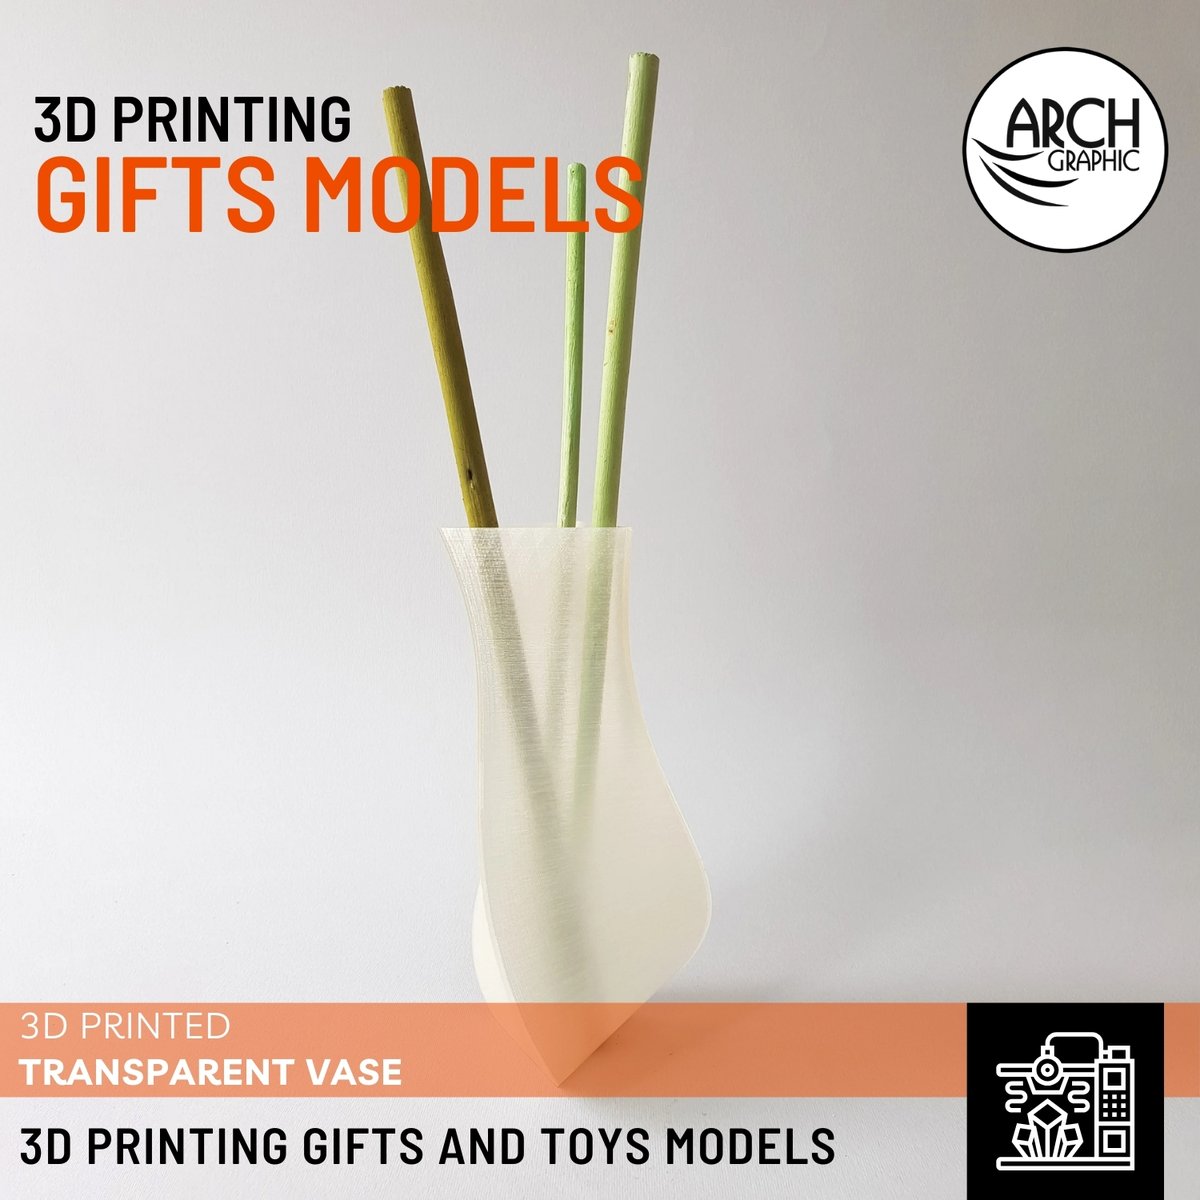 🌟 Find Unique 3D Printed Gifts Models in UAE! 🎁 Discover the Elegance of Transparent Vases by ARCH GRAPHIC. Shop now: arch-graphic.com #3Dprinting #GiftIdeas #HomeDecor #InteriorDesign #HandmadeGifts #CustomDesigns #UAEArt #DubaiDesign #CreativeGifts #PersonalizedGifts